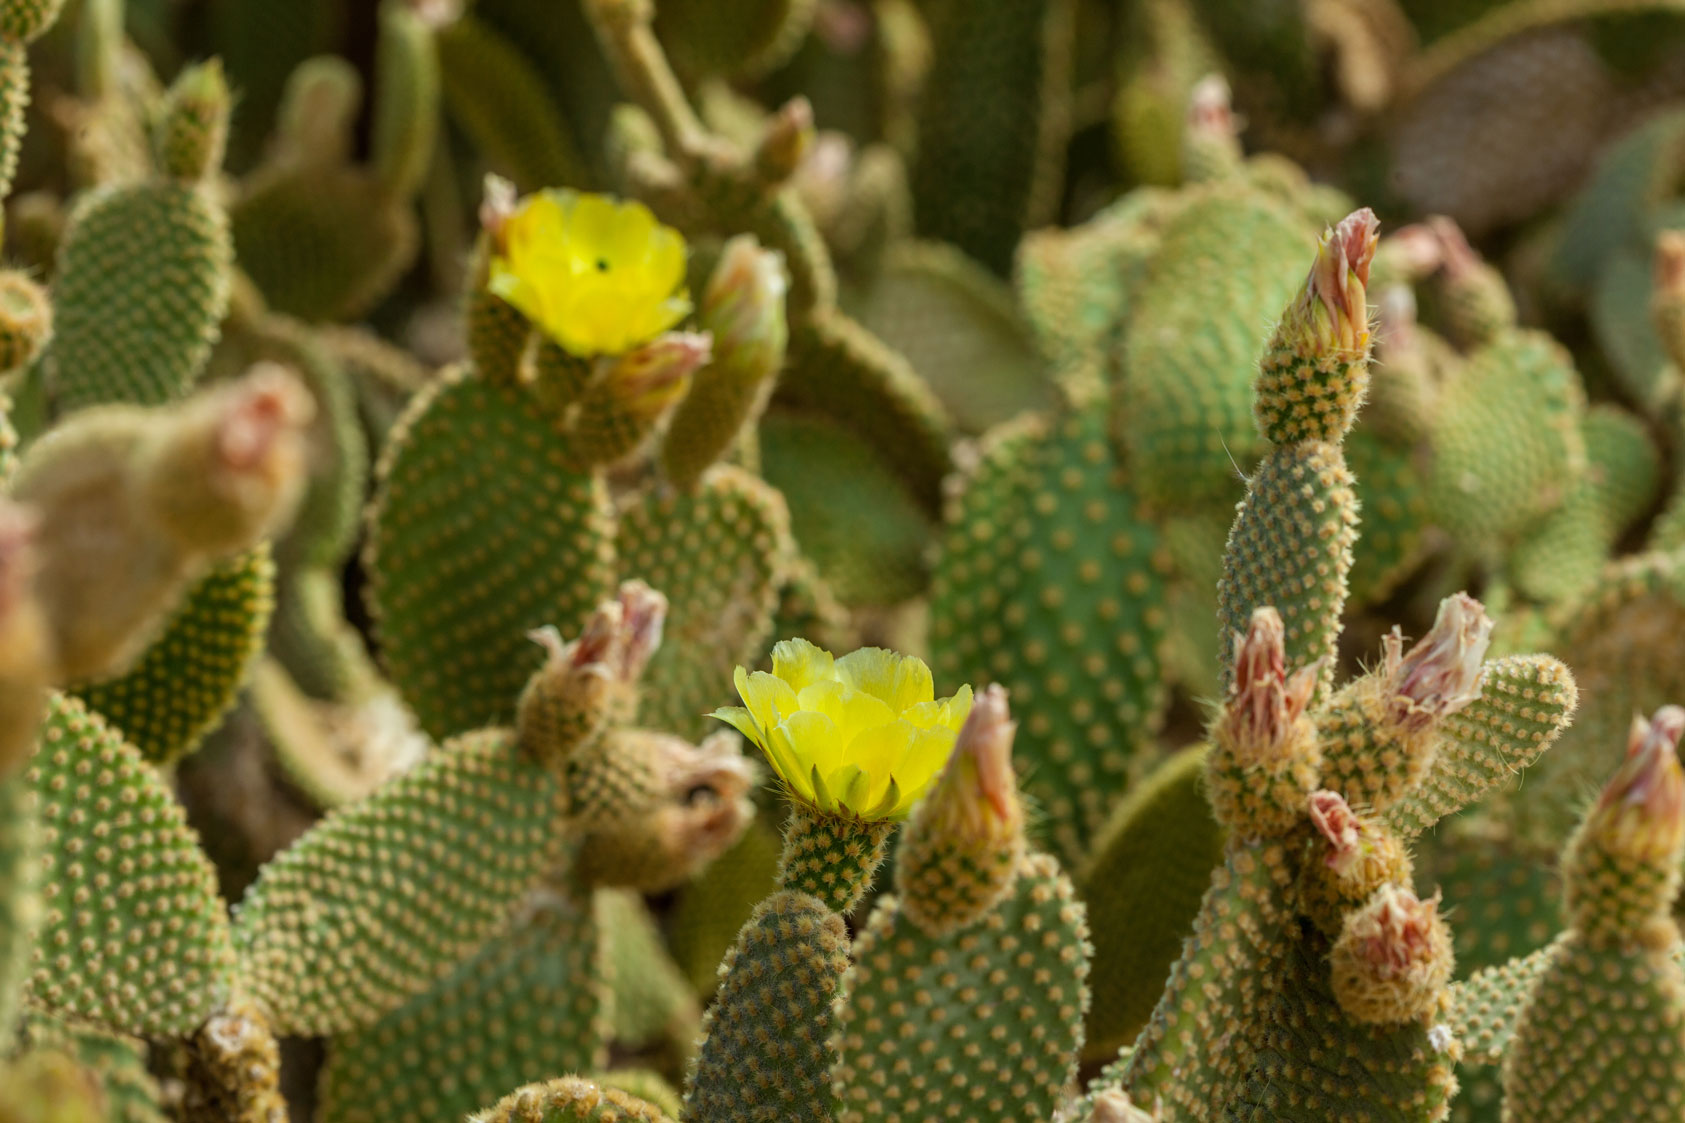 Several pads of Bunny Ear cactus show buds almost ready to bloom. Only two yellow flowers have emerged.